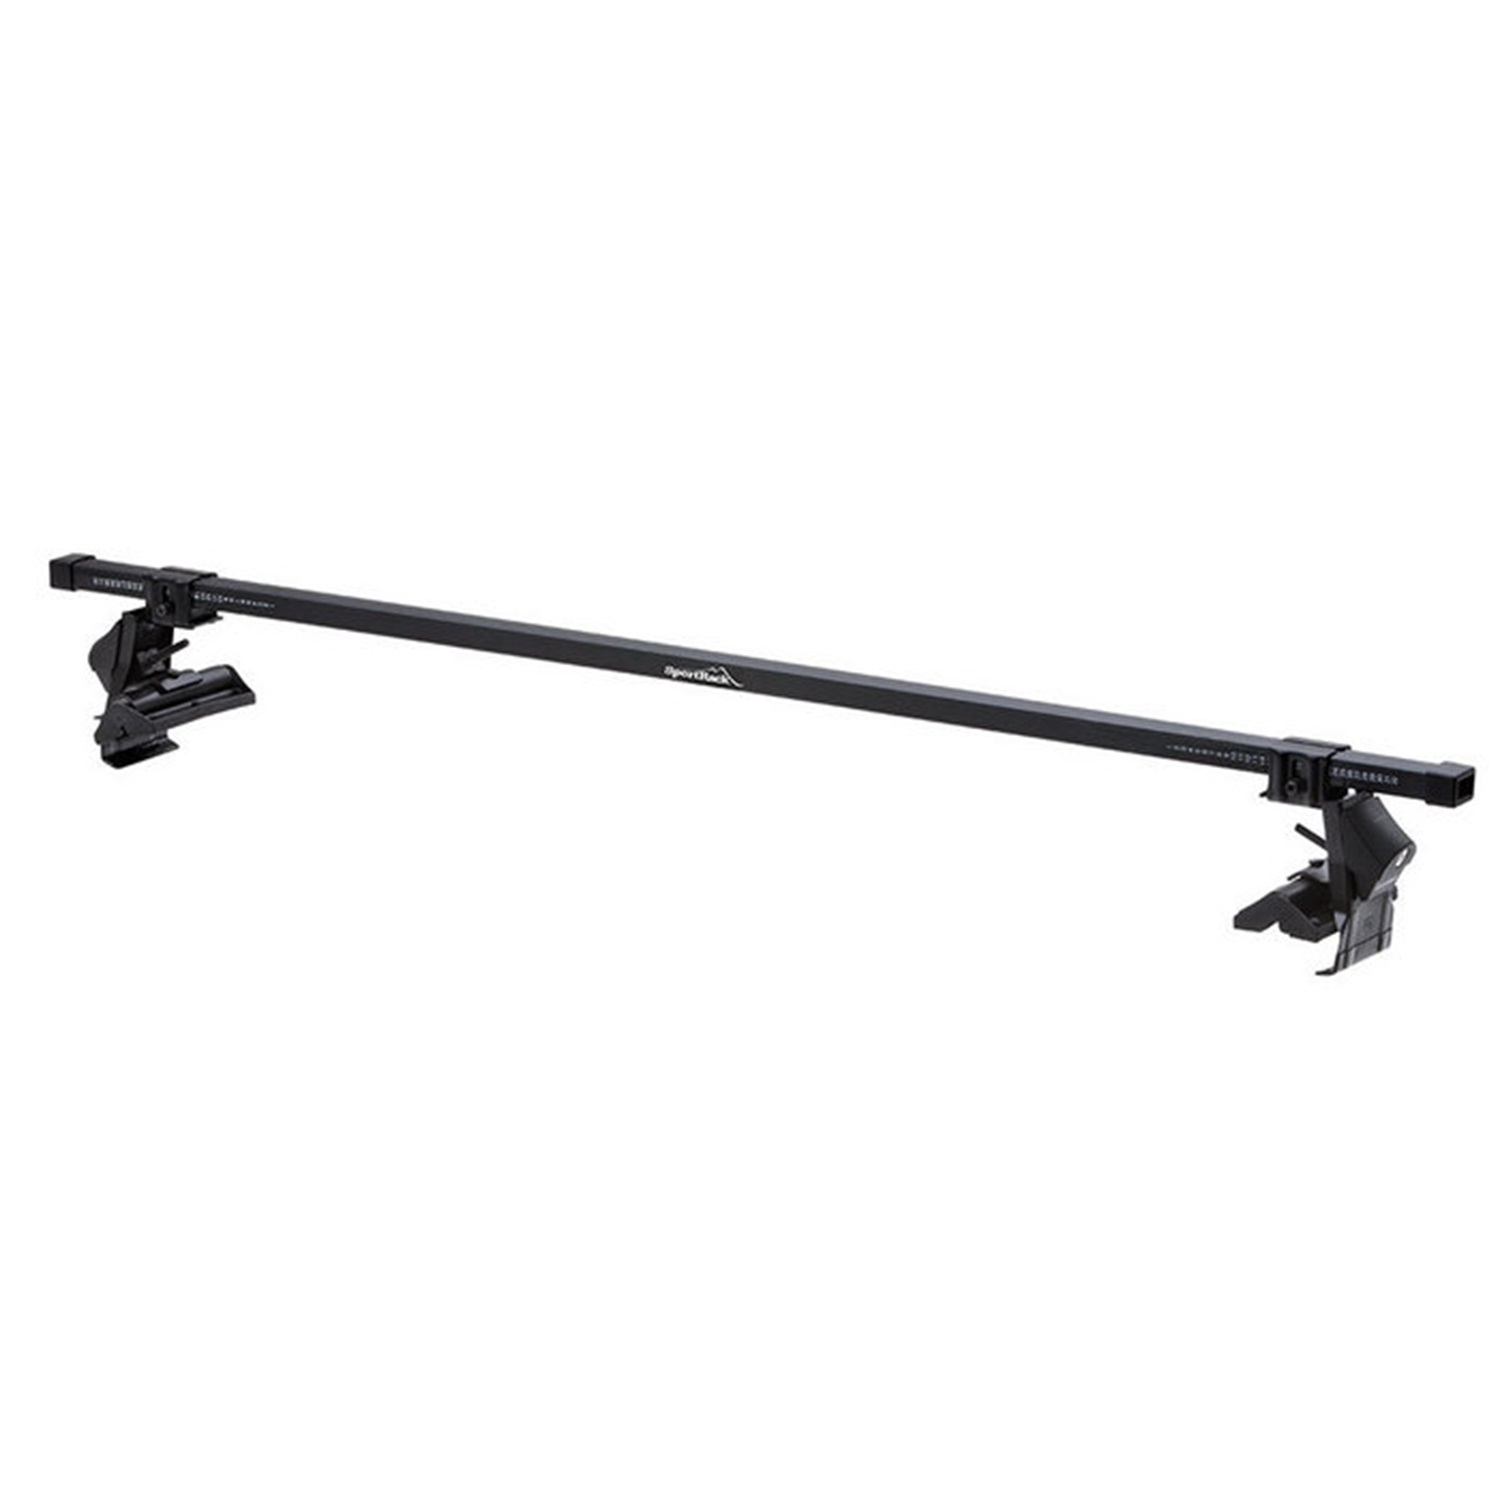 Thule Thule SR1008 SportRack Complete Roof Rack System Fits 86-93 Supra